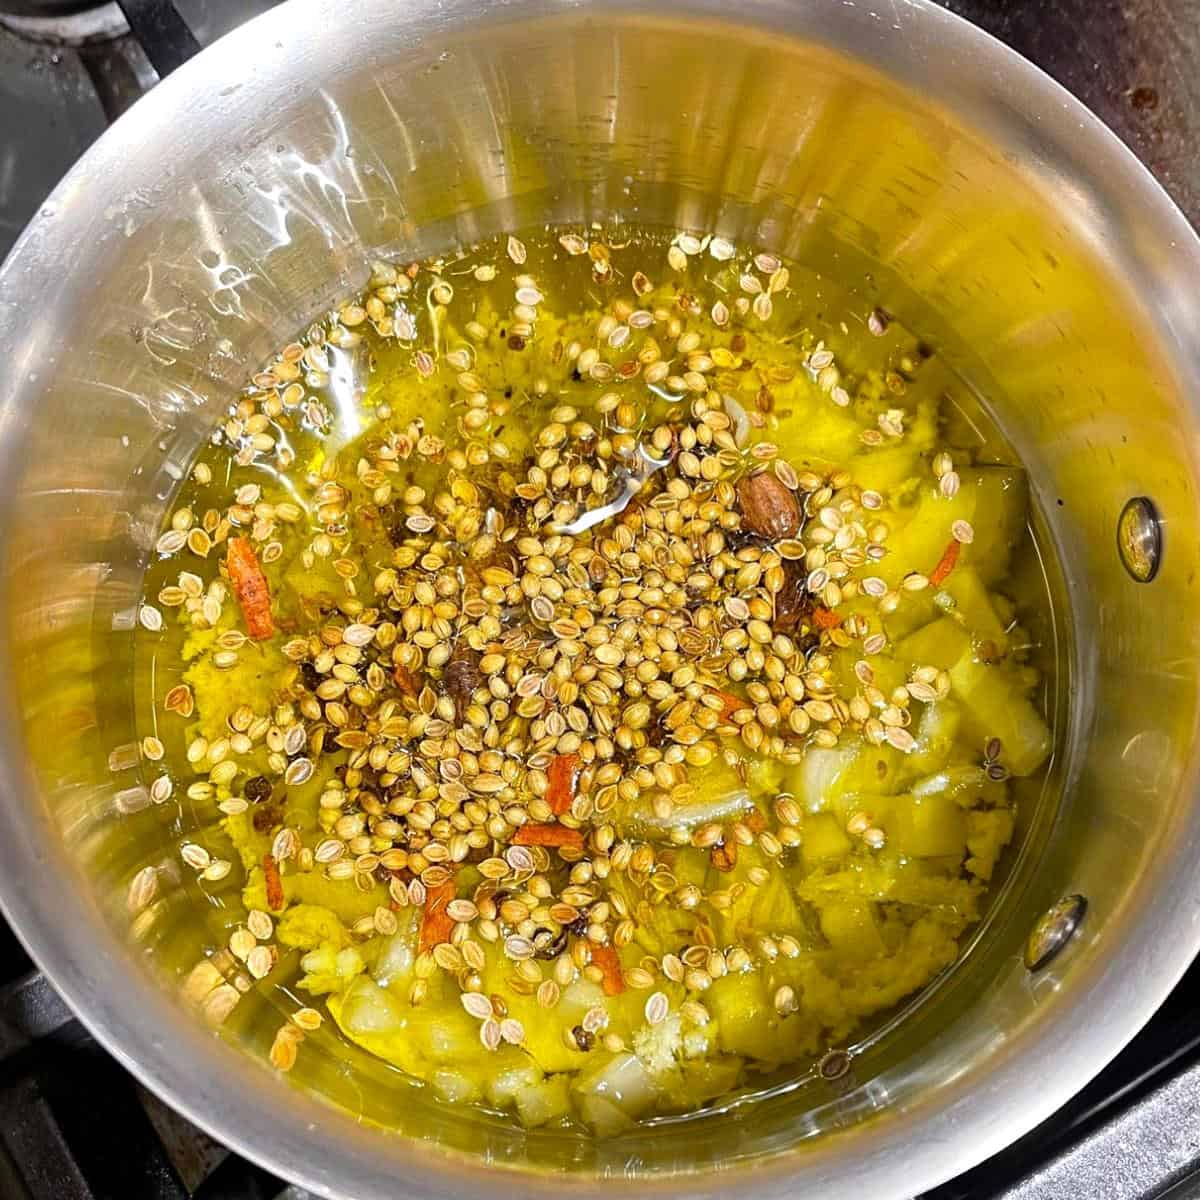 Spices, herbs in saucepan with olive oil.